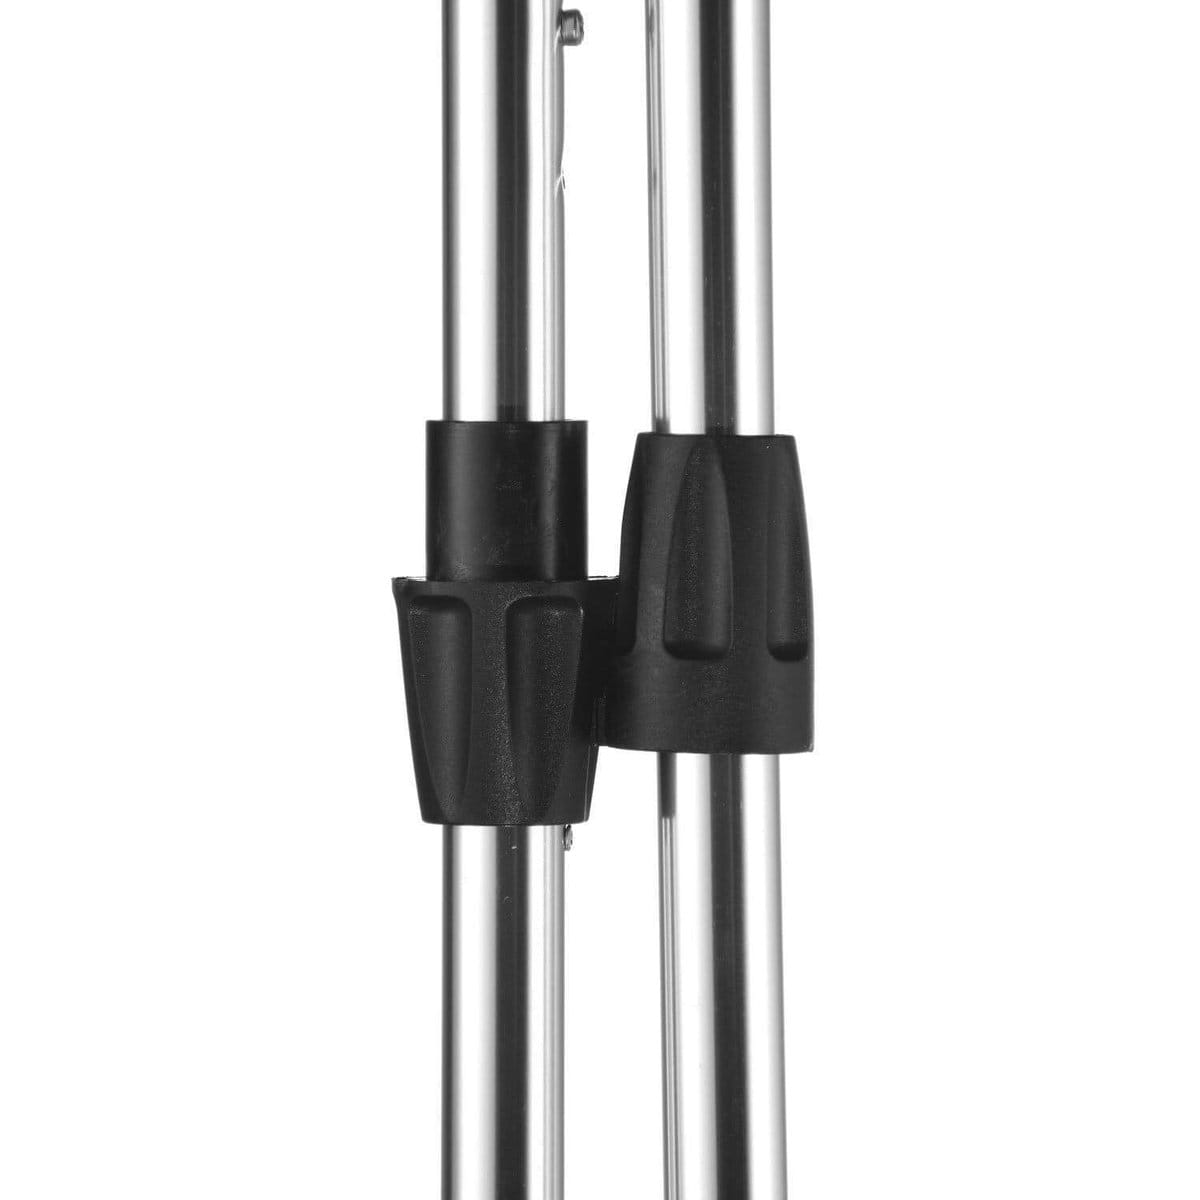 Attwood Marine Qualifies for Free Shipping Attwood Folding Pole Light LED 84" Replaces 5540-84-1 #5540-84T1